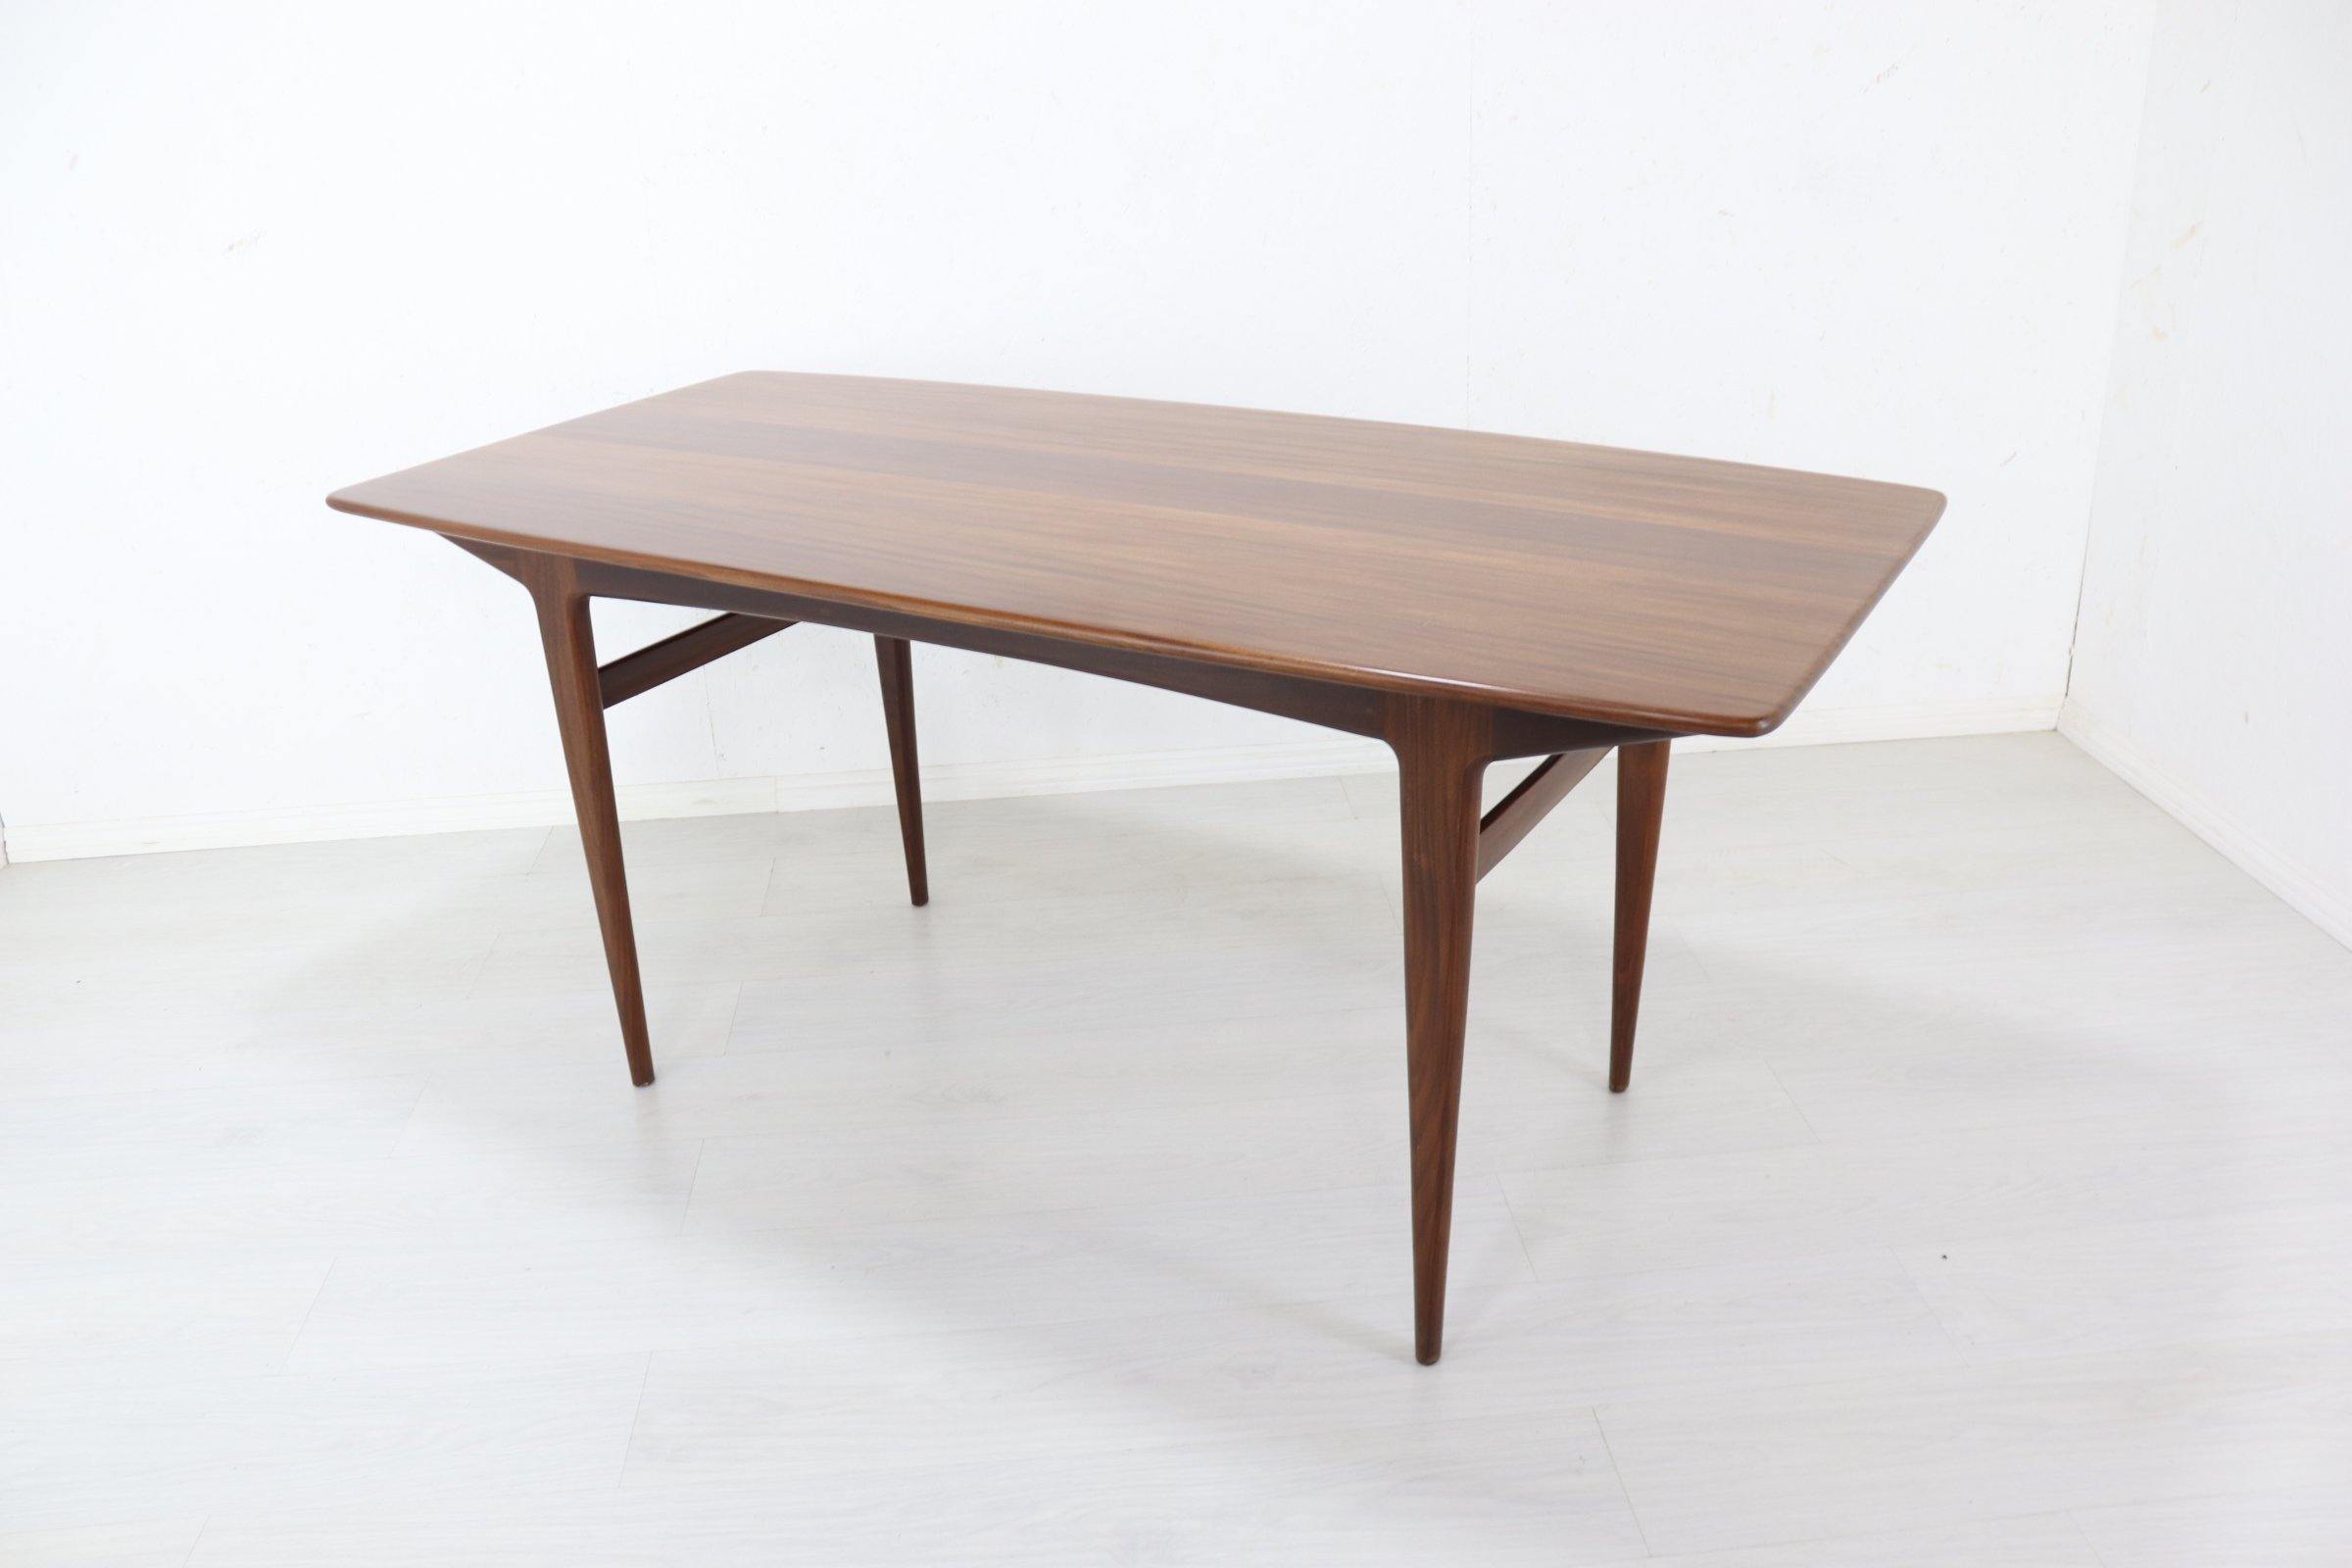 A Younger Afromosia Dining Table - teakyfinders